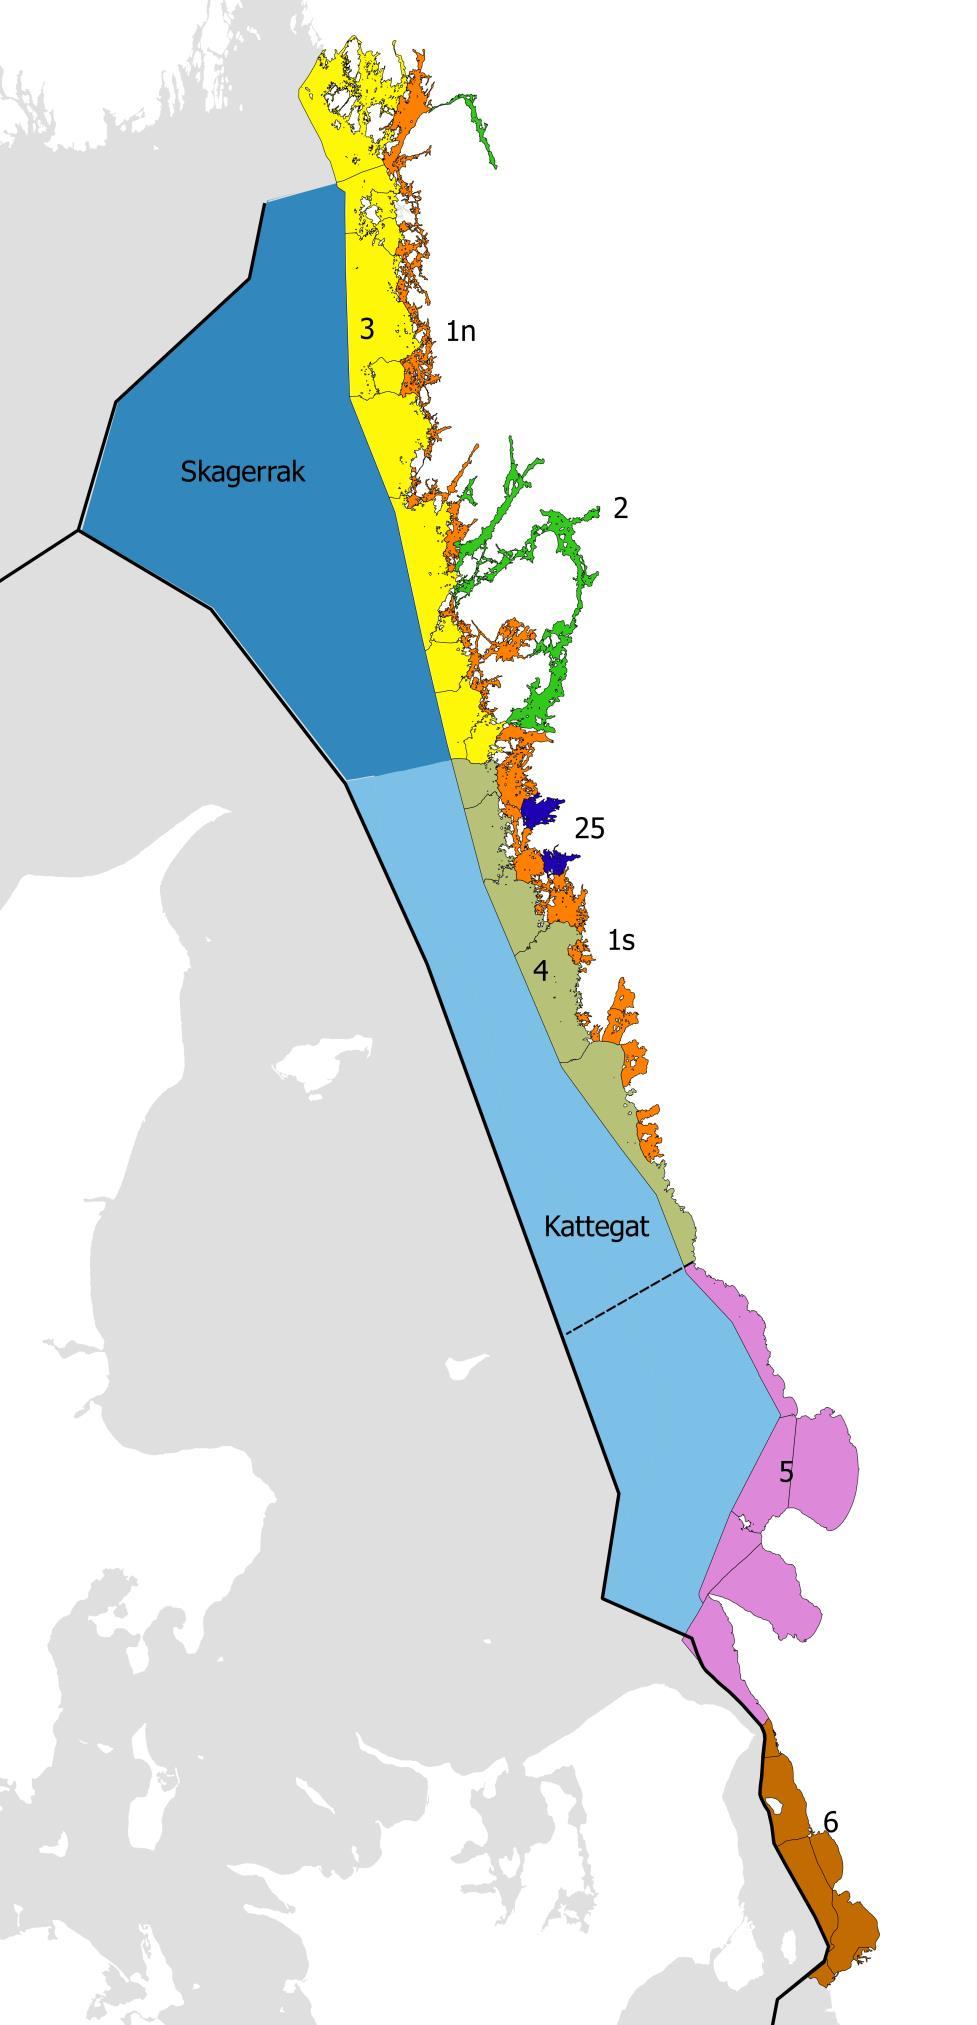 Swedish National Report on Eutrophication Status in the Skagerrak, Kattegat and the Sound Figure 2 Map of the assessment units in